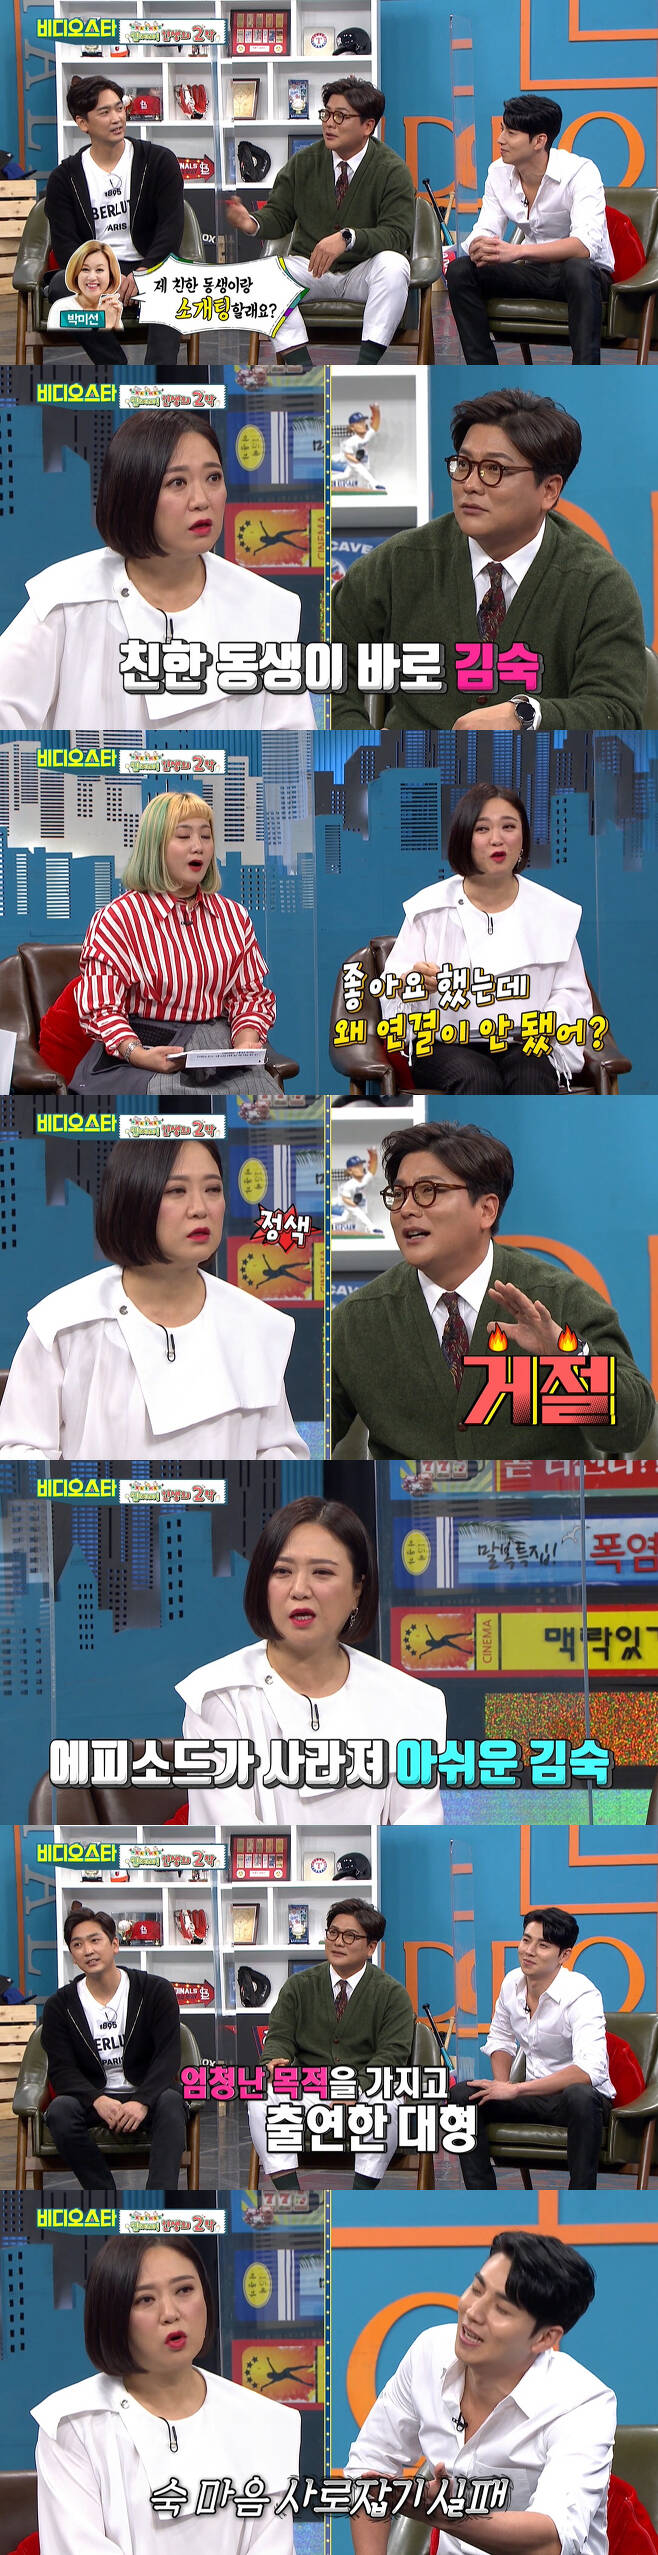 Video Star former Baseball player Kim Tae-kyun has revealed an anecdote that almost blind dated broadcaster Kim Sook.24 Days MBC Everlon Video Star broadcast The late entertainer special, throw!The second act of life special feature featured former Baseball player Bong Jung-geun, Shim Soo-chang, Kim Tae-kyun and Lee Dae-hyung.Kim Sook said to Kim Tae-kyun, I was sorry for the appearance of the show because it was no jam.Kim Tae-kyun said, I dont really have a talent, I have nothing to say about interviewing the writer.MC Park Soo-hyun responded by saying, Its already no jam and laughed.But Kim Tae-kyun soon caught the attention of saying that he was first to reveal something in Video Star. It was an anecdote that almost blind dated Kim Sook.Kim Tae-kyun said, Park Mi-sun, who met in a program called My Best Note, asked me, Do you want to introduce me with my close sister?Kim Sook asked, Why did not you connect? Kim Tae-kyun said, I did not say I was good. I was surprised to tell my sister.Kim Sook said, Come along. Then Kim Tae-kyun asked her age, and Kim Sook was surprised by the age of seven.Lee Dae-hyung, who was listening to it from the side, said, I came out to capture Kim Sooks heart.I have an ambition to have all my property. Lee Seung-gis sister is my woman .However, Kim Sook listened to the song and laughed, responding that it is difficult to give all property.